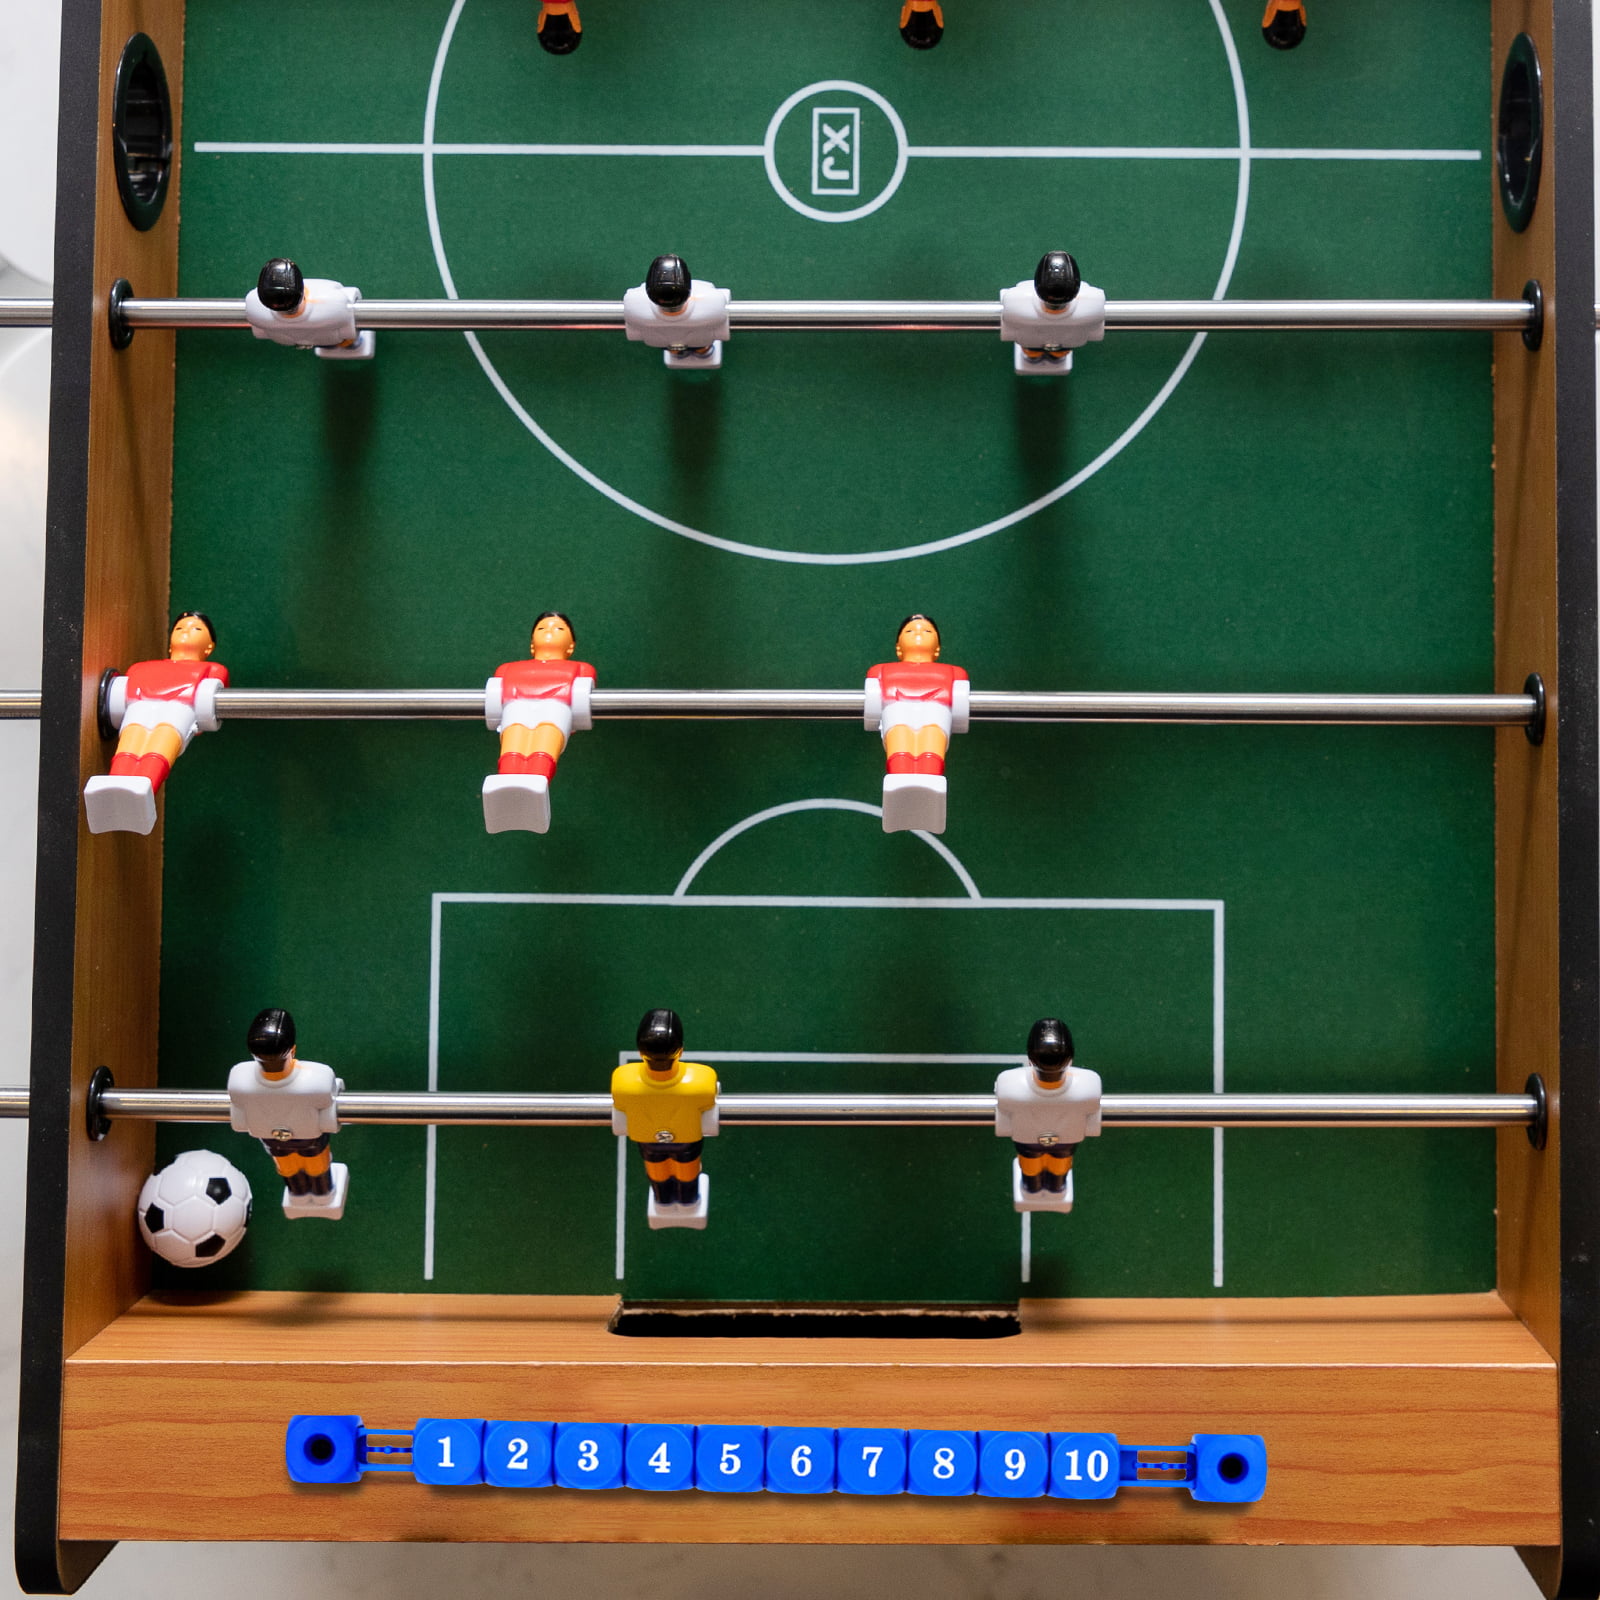 Foosball Counter Scoring Units Soccer Table Football Score Counters Marker LB 